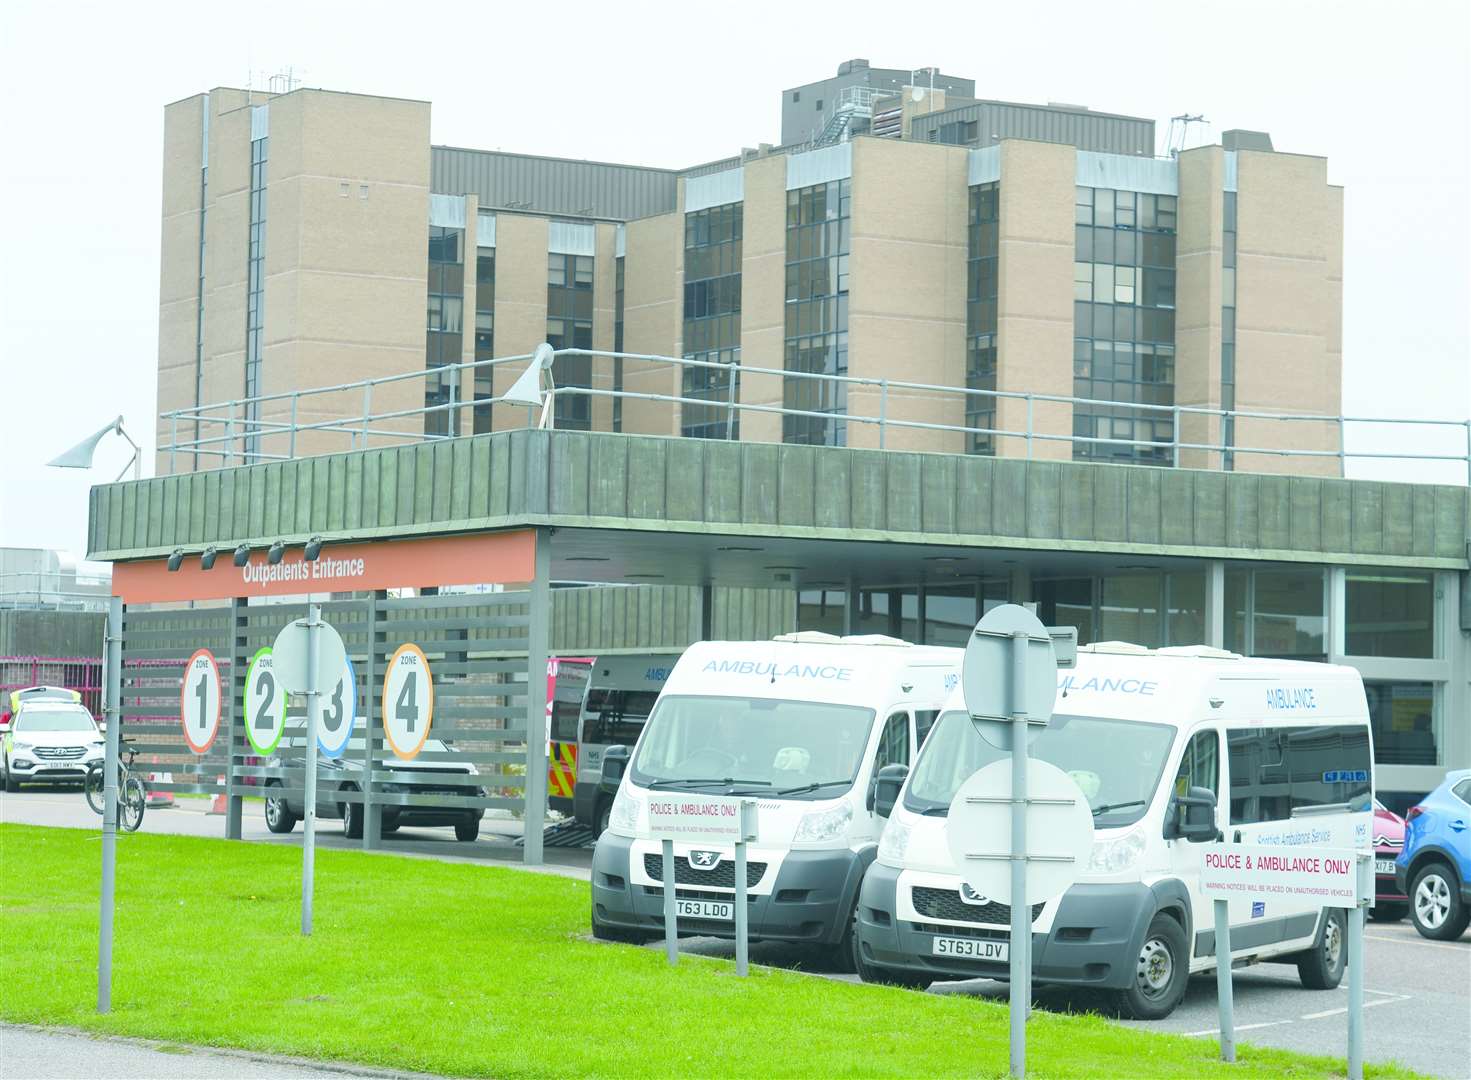 Waiting times are longer than normal at Raigmore Hospital today.